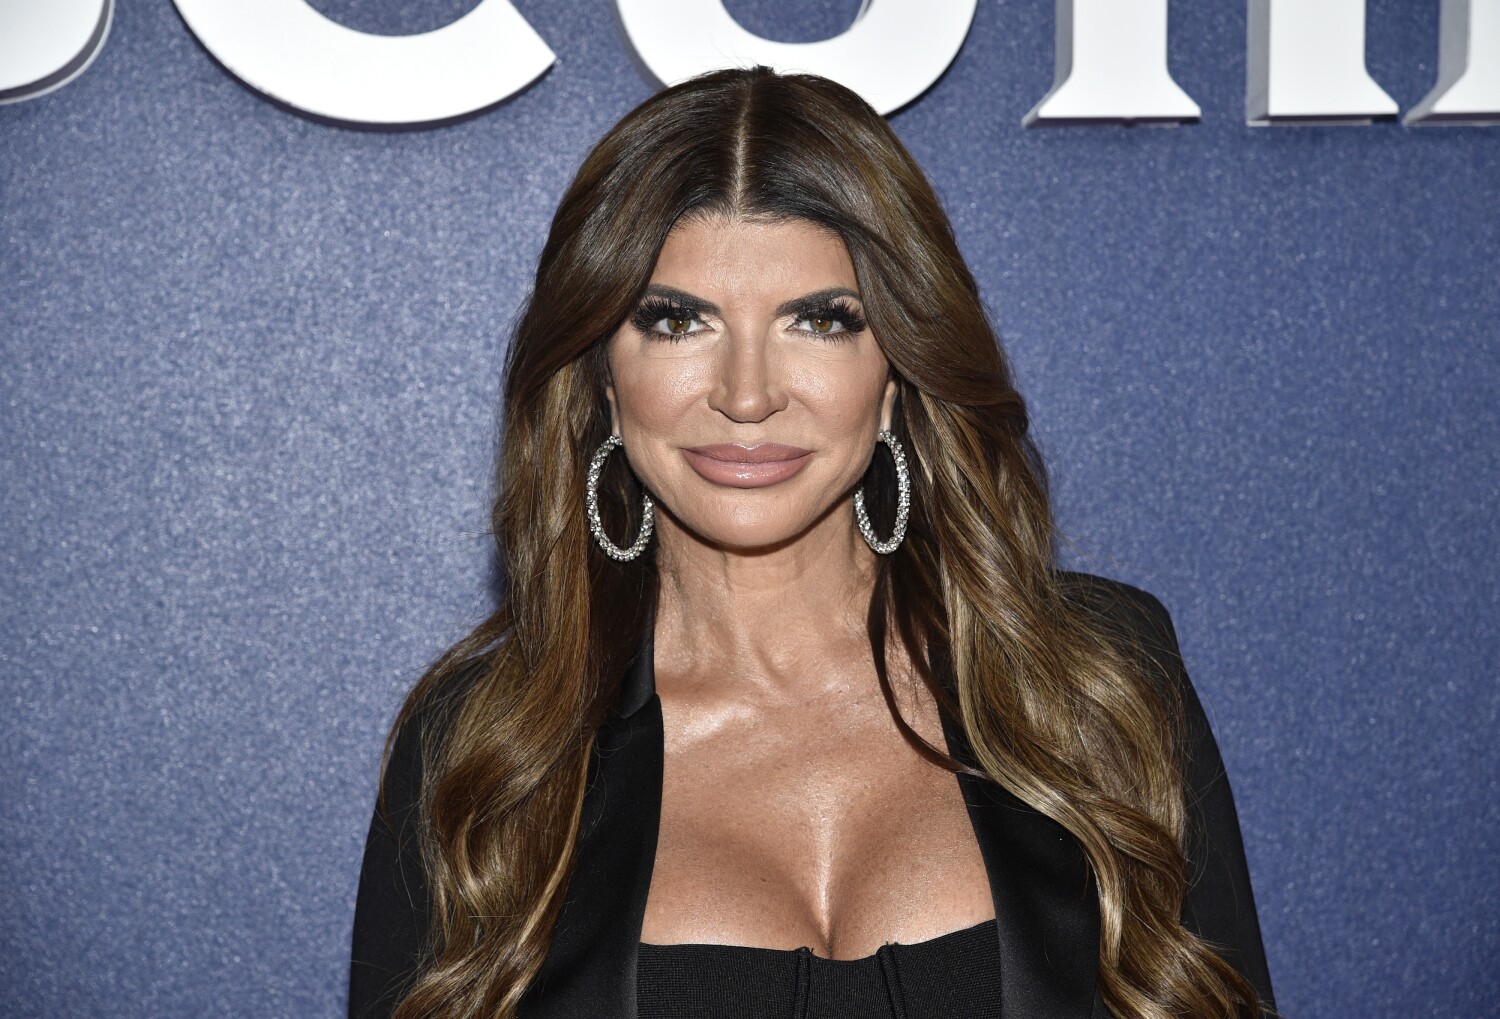 'Real Housewives' star Teresa Giudice and her mountain of hair marry Luis Ruelas